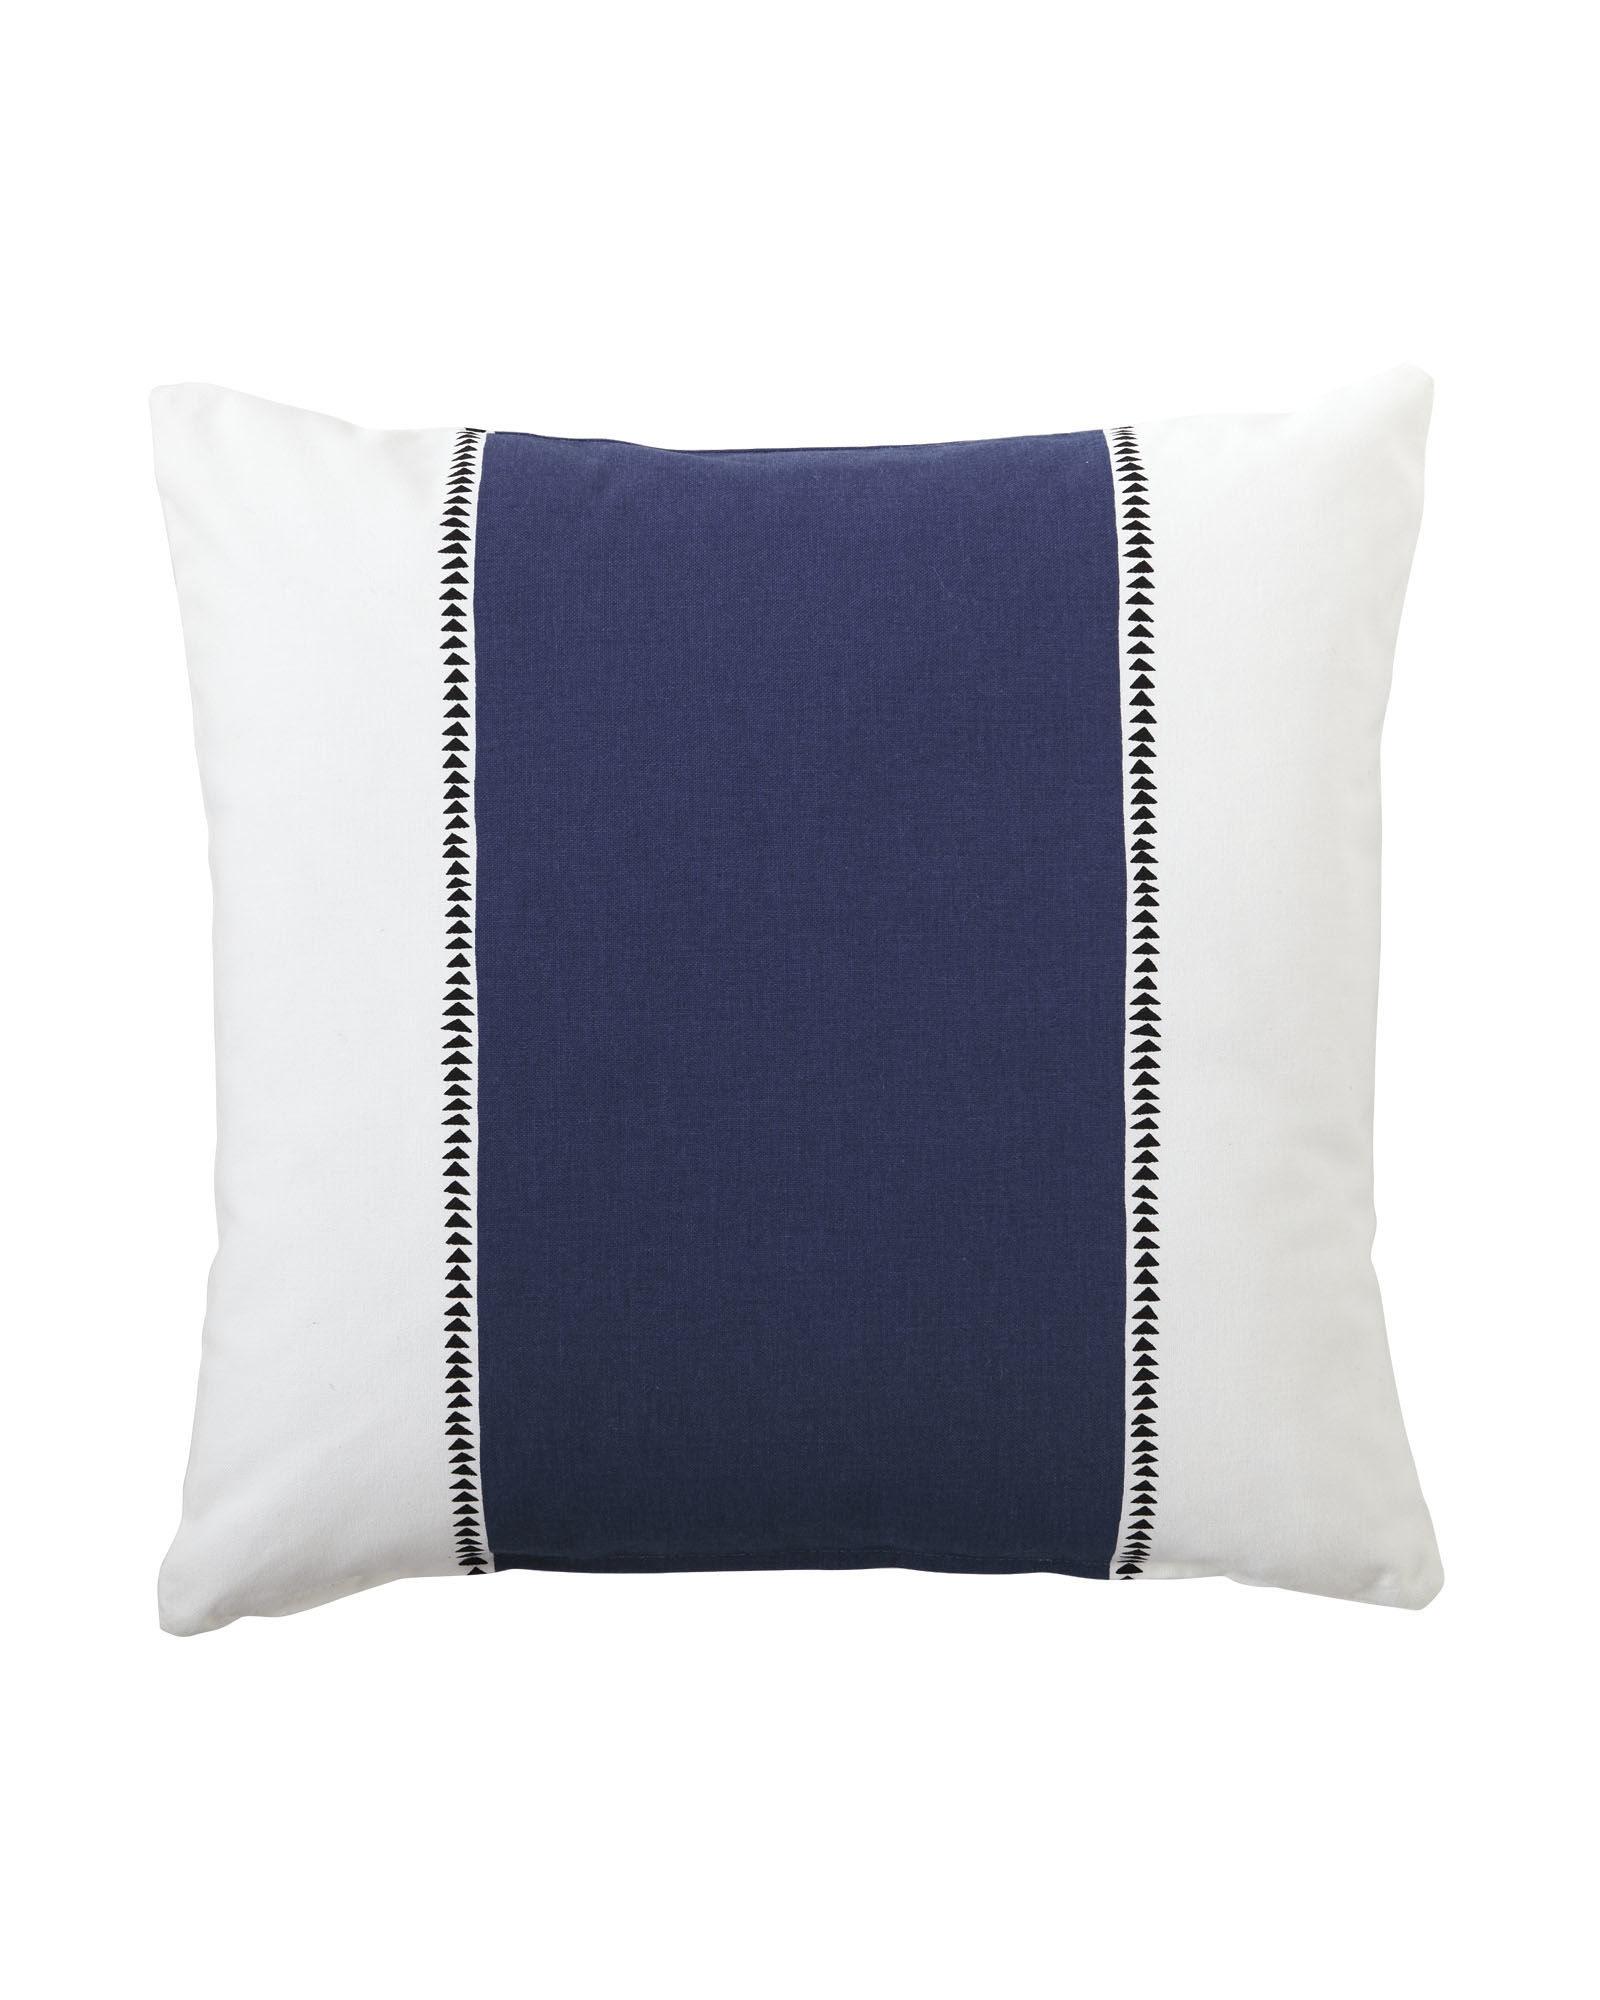 Racing Stripe Pillow Cover Navy, 20"x20"- Insert Sold Separately - Image 0